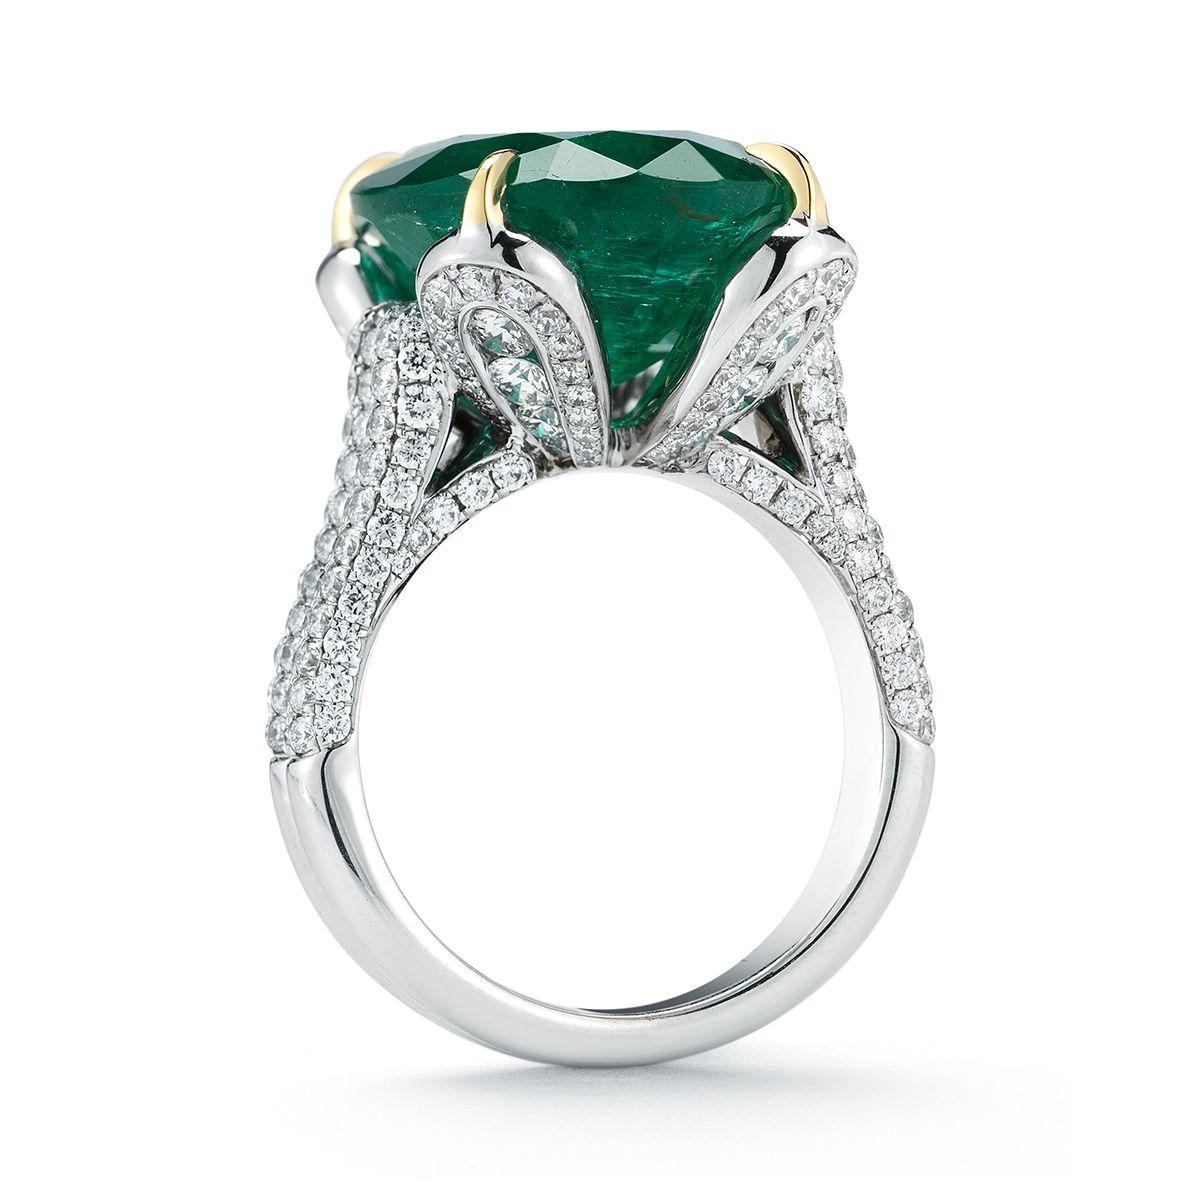 18k White Gold 13.94ct Emerald and 1.98ct Diamond Ring
A romantic petal setting cradles a lovely oval Emerald.
Item: # 01941
Metal: 18k W / Y
Lab: Gia
Color Weight: 13.94 ct.
Diamond Weight: 1.98 ct.